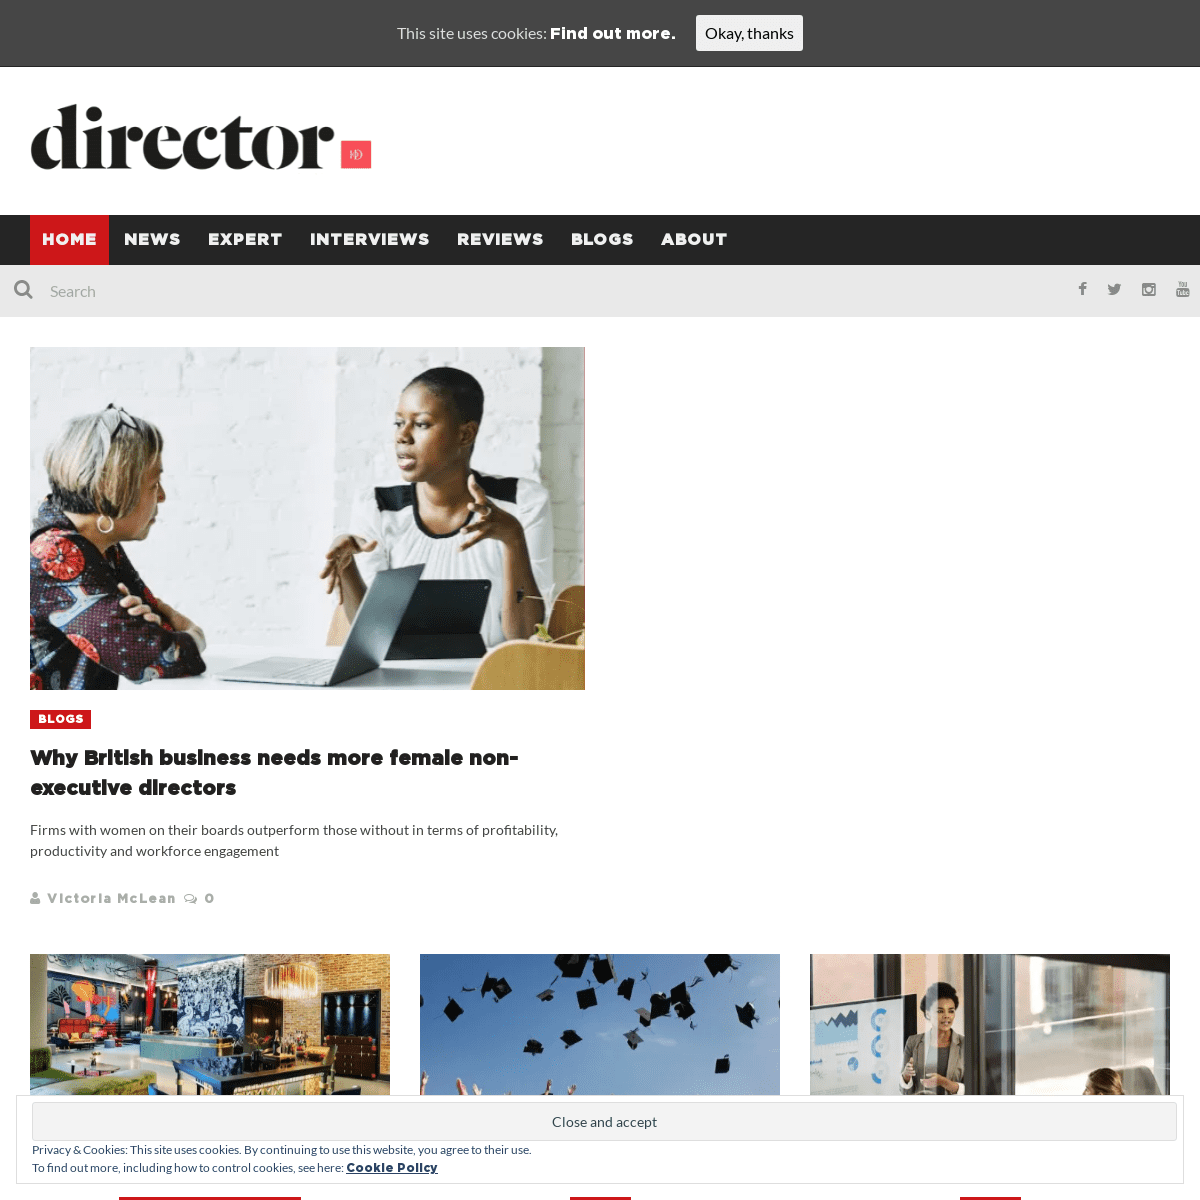 A complete backup of director.co.uk